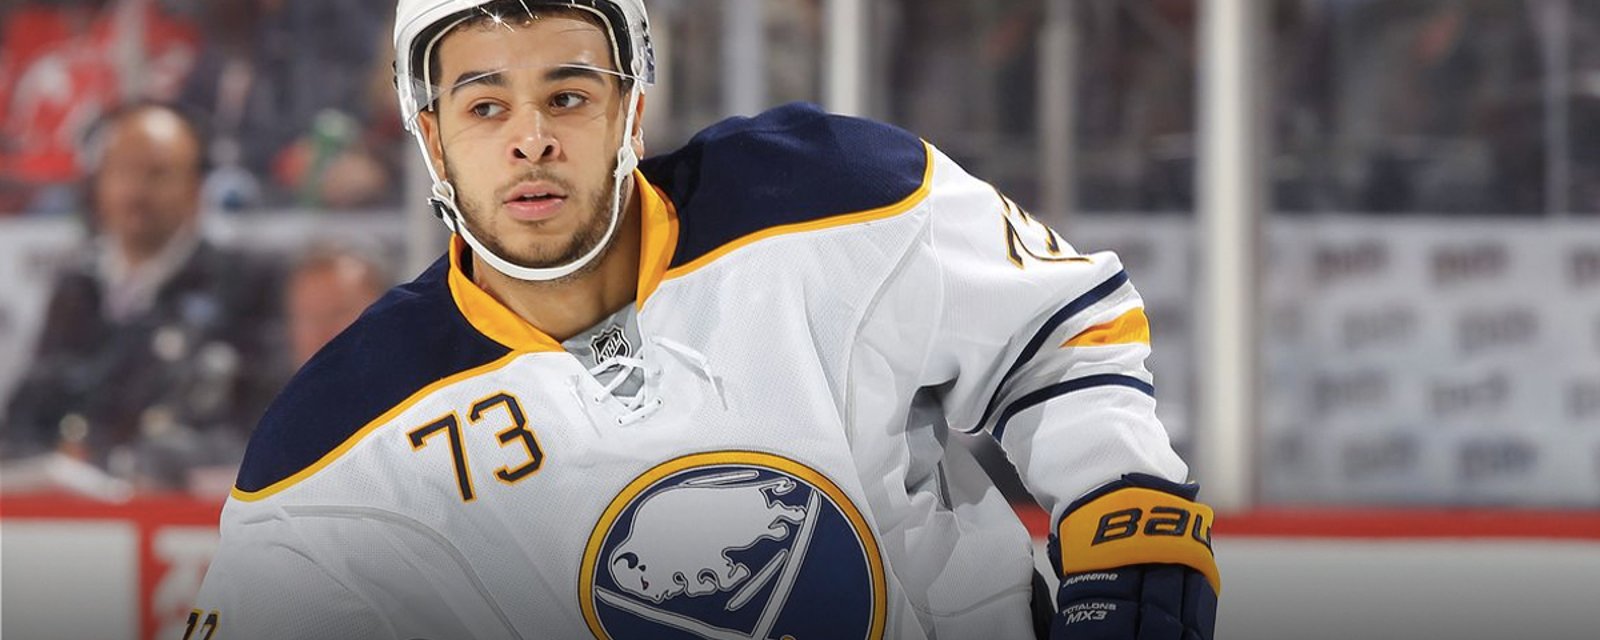 Breaking: Sabres announce AHL demotion